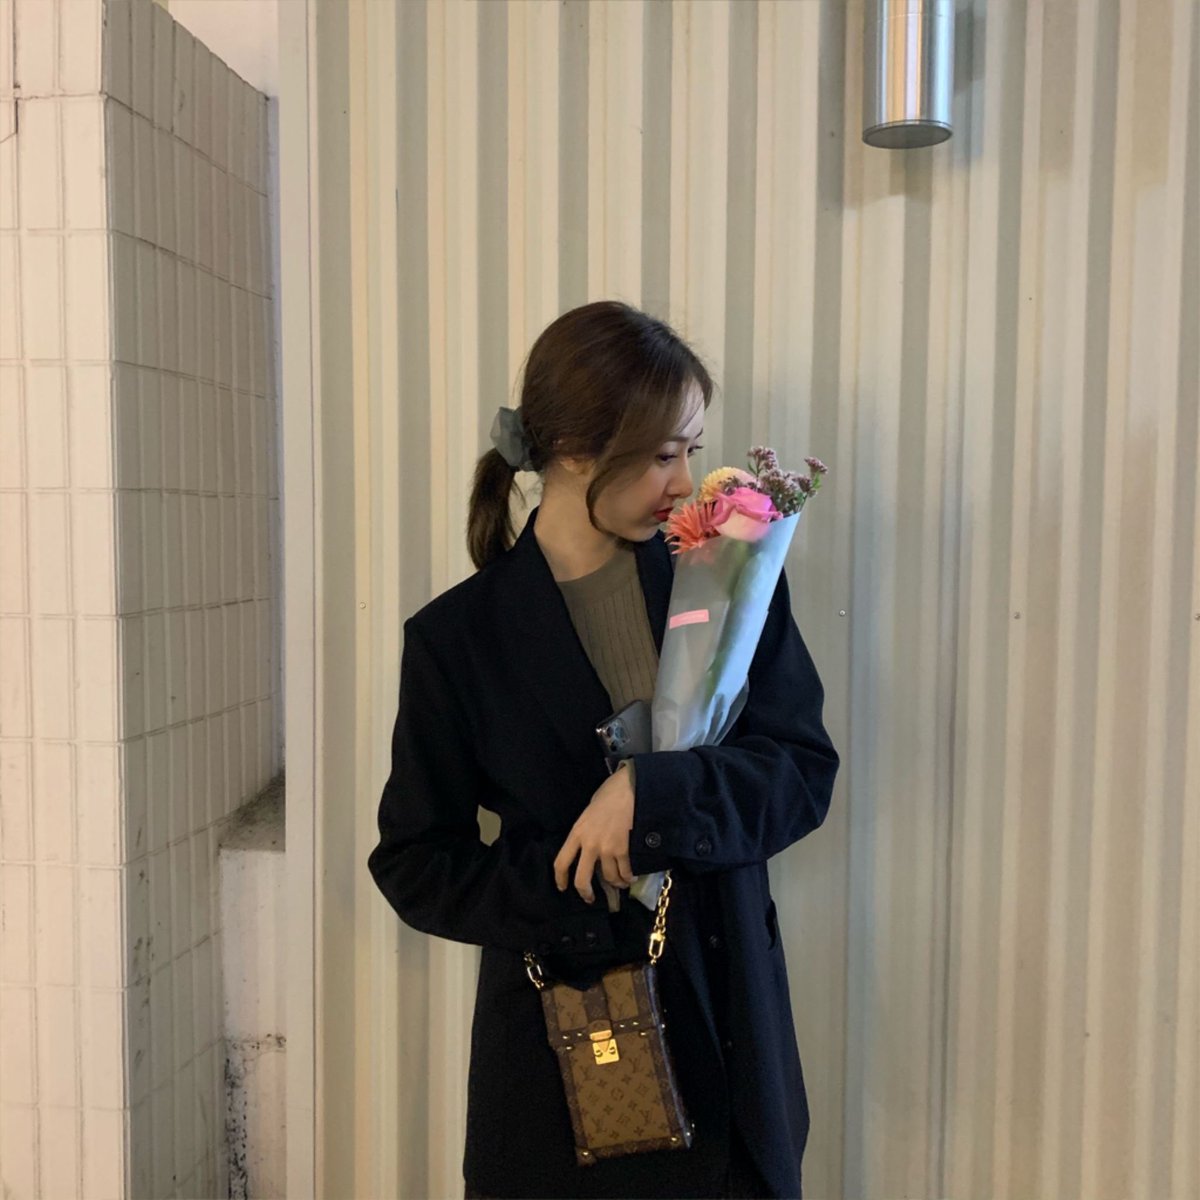 yerin bought flowers for sinb cause she wasn't feeling well on that day